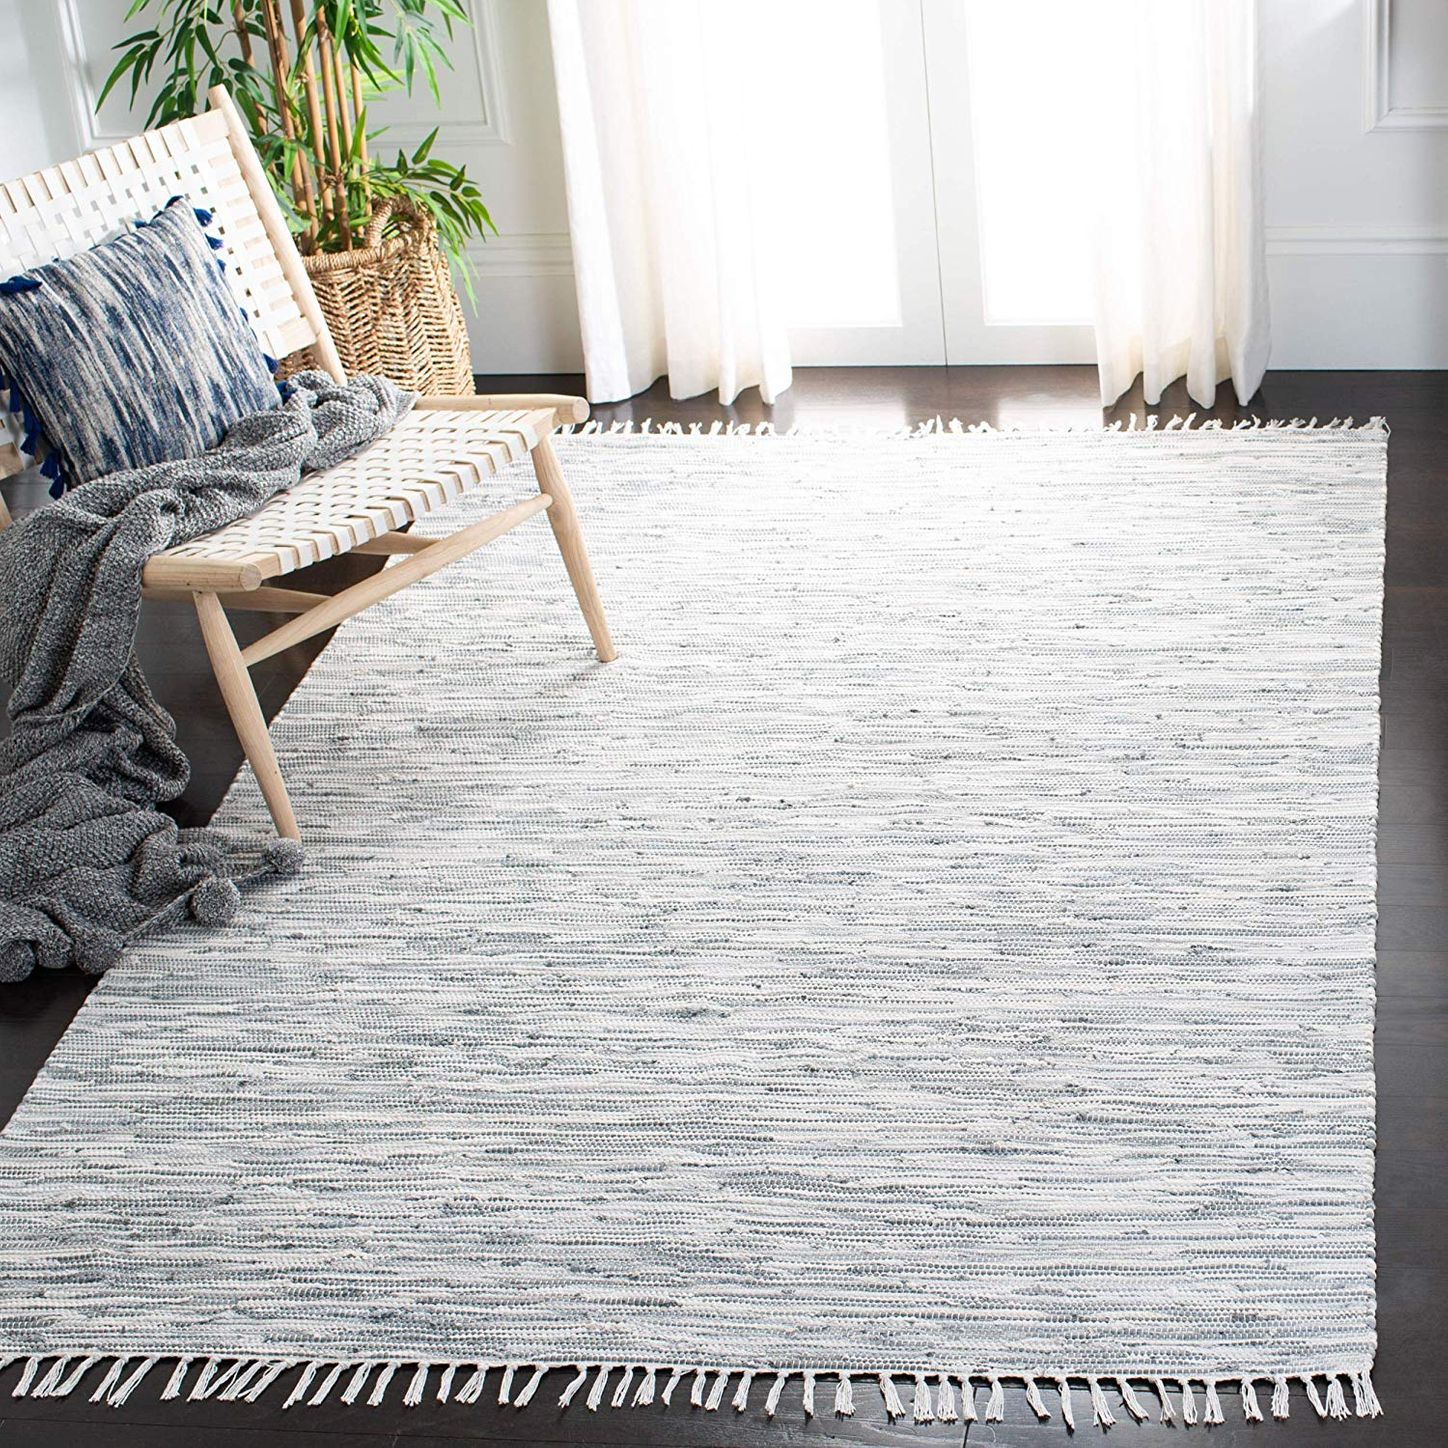 The 16 Best Washable Rugs 2021, Rug Runners For Kitchen Washable